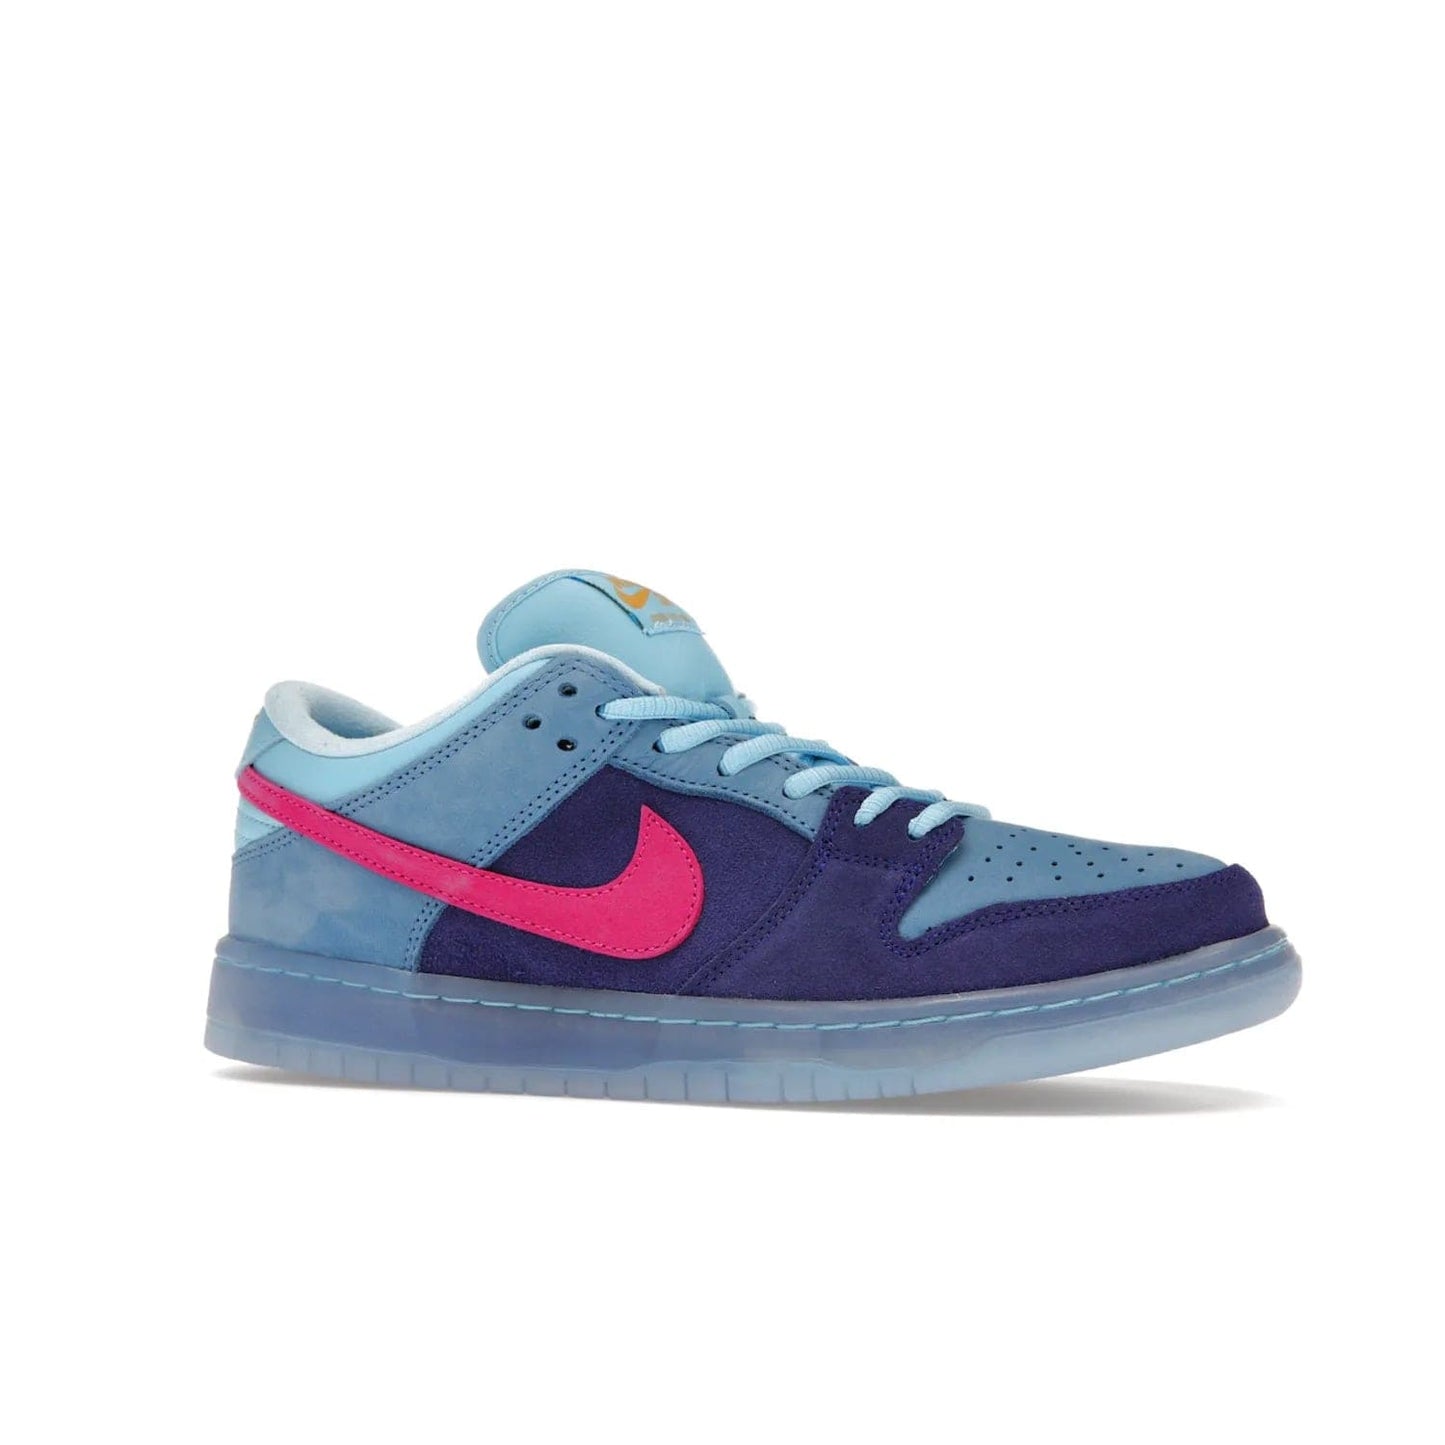 Nike SB Dunk Low Run The Jewels - Image 3 - Only at www.BallersClubKickz.com - The Nike SB Dunk Low Run The Jewels pays tribute to the Run the Jewels 3 album cover. It features a blue suede upper with pink suede accents, gold branding and 3 lace sets. RTJ insoles complete this limited edition sneaker. Get it now for your shoe collection.